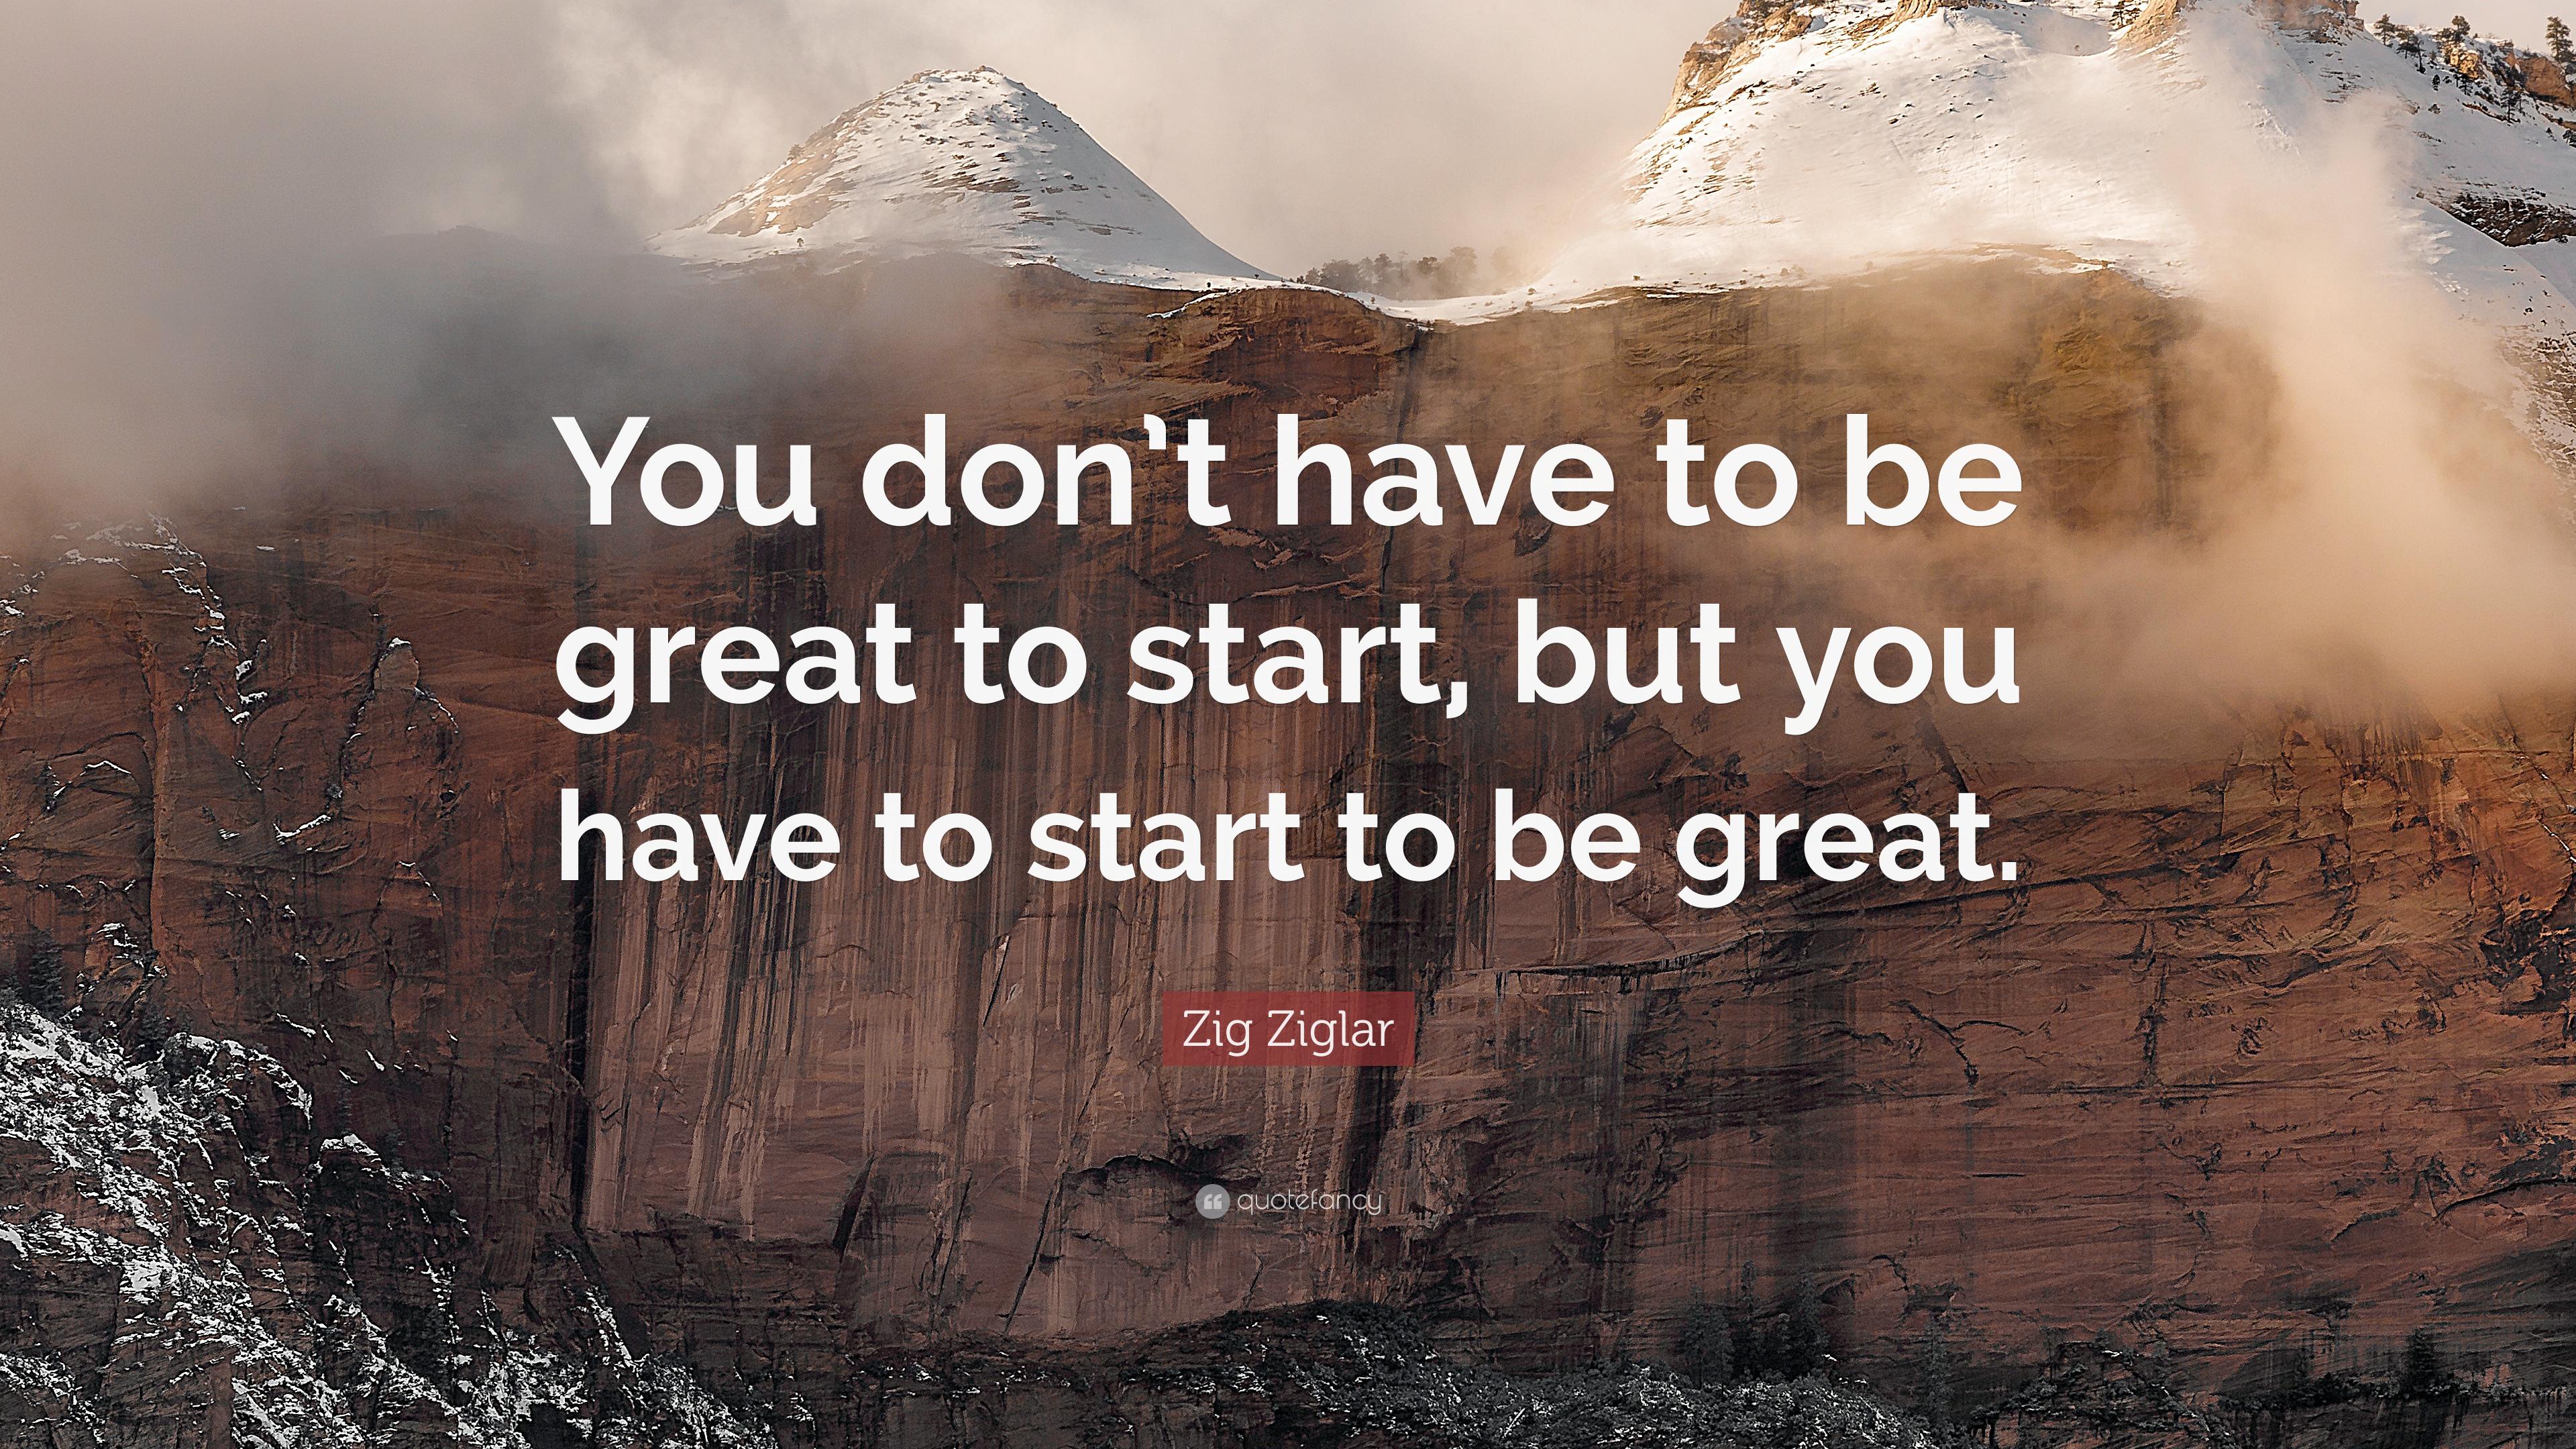 Zig Ziglar Quote: “You don't have to be great to start, but you have